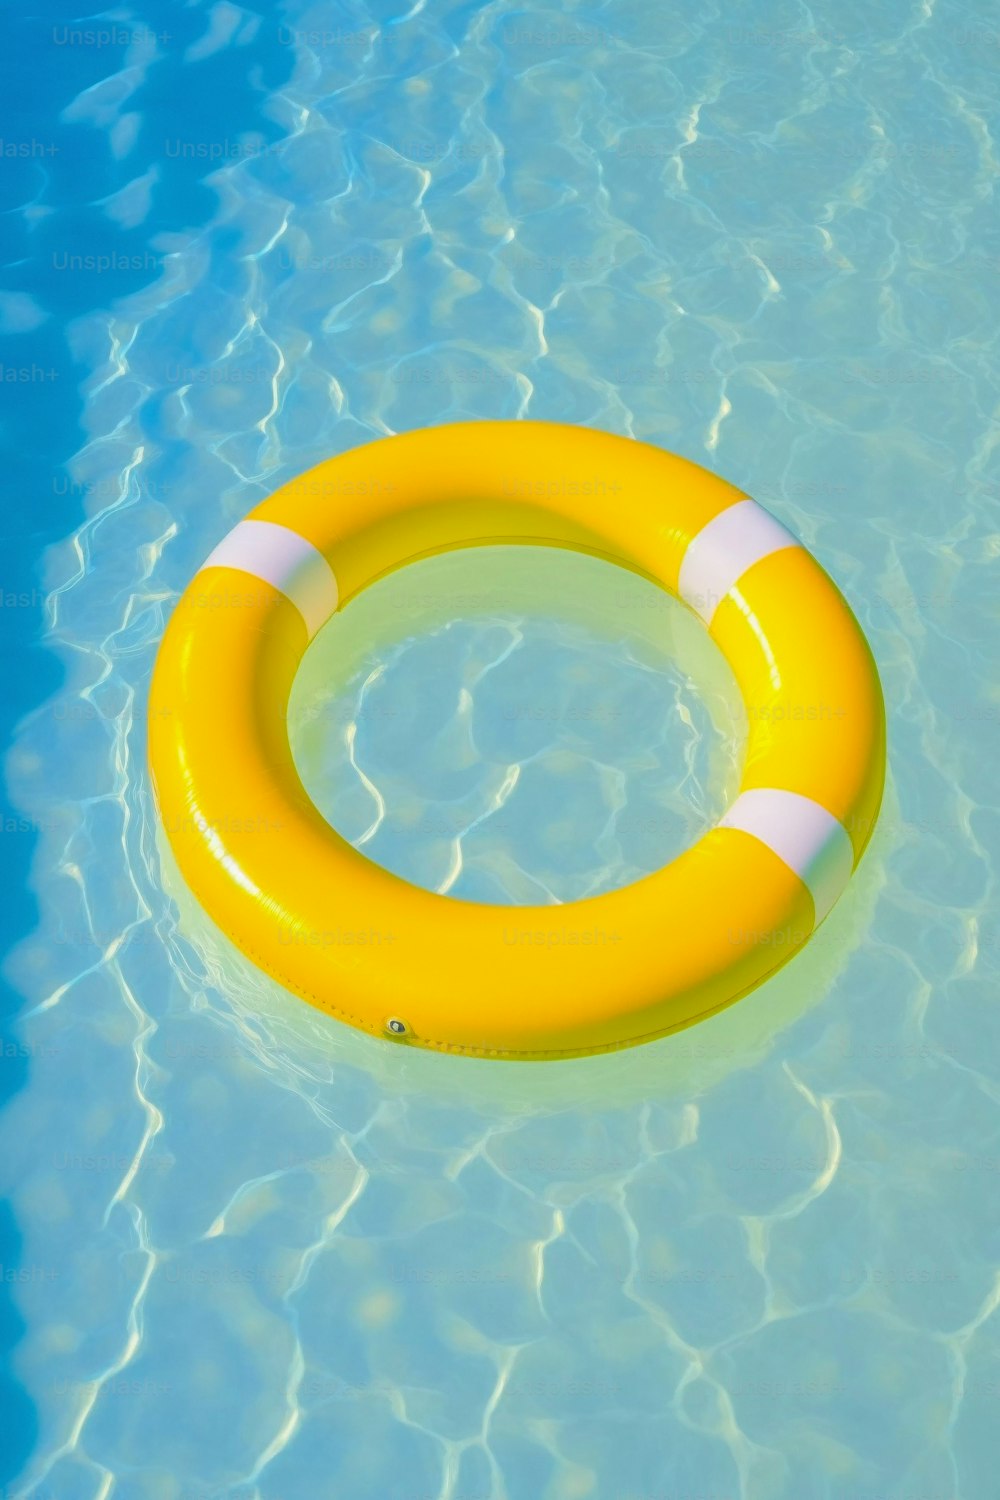 a life preserver floating in a pool of water